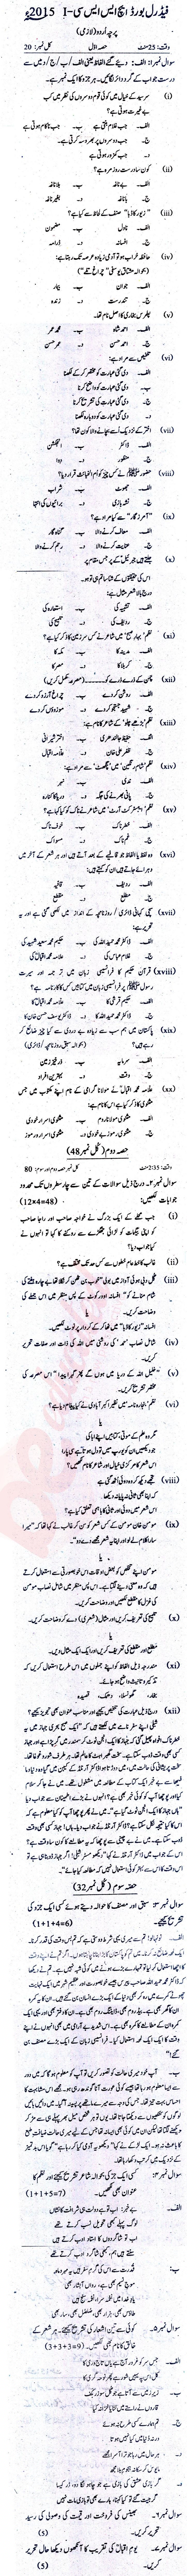 Urdu 11th class Past Paper Group 1 Federal BISE  2015